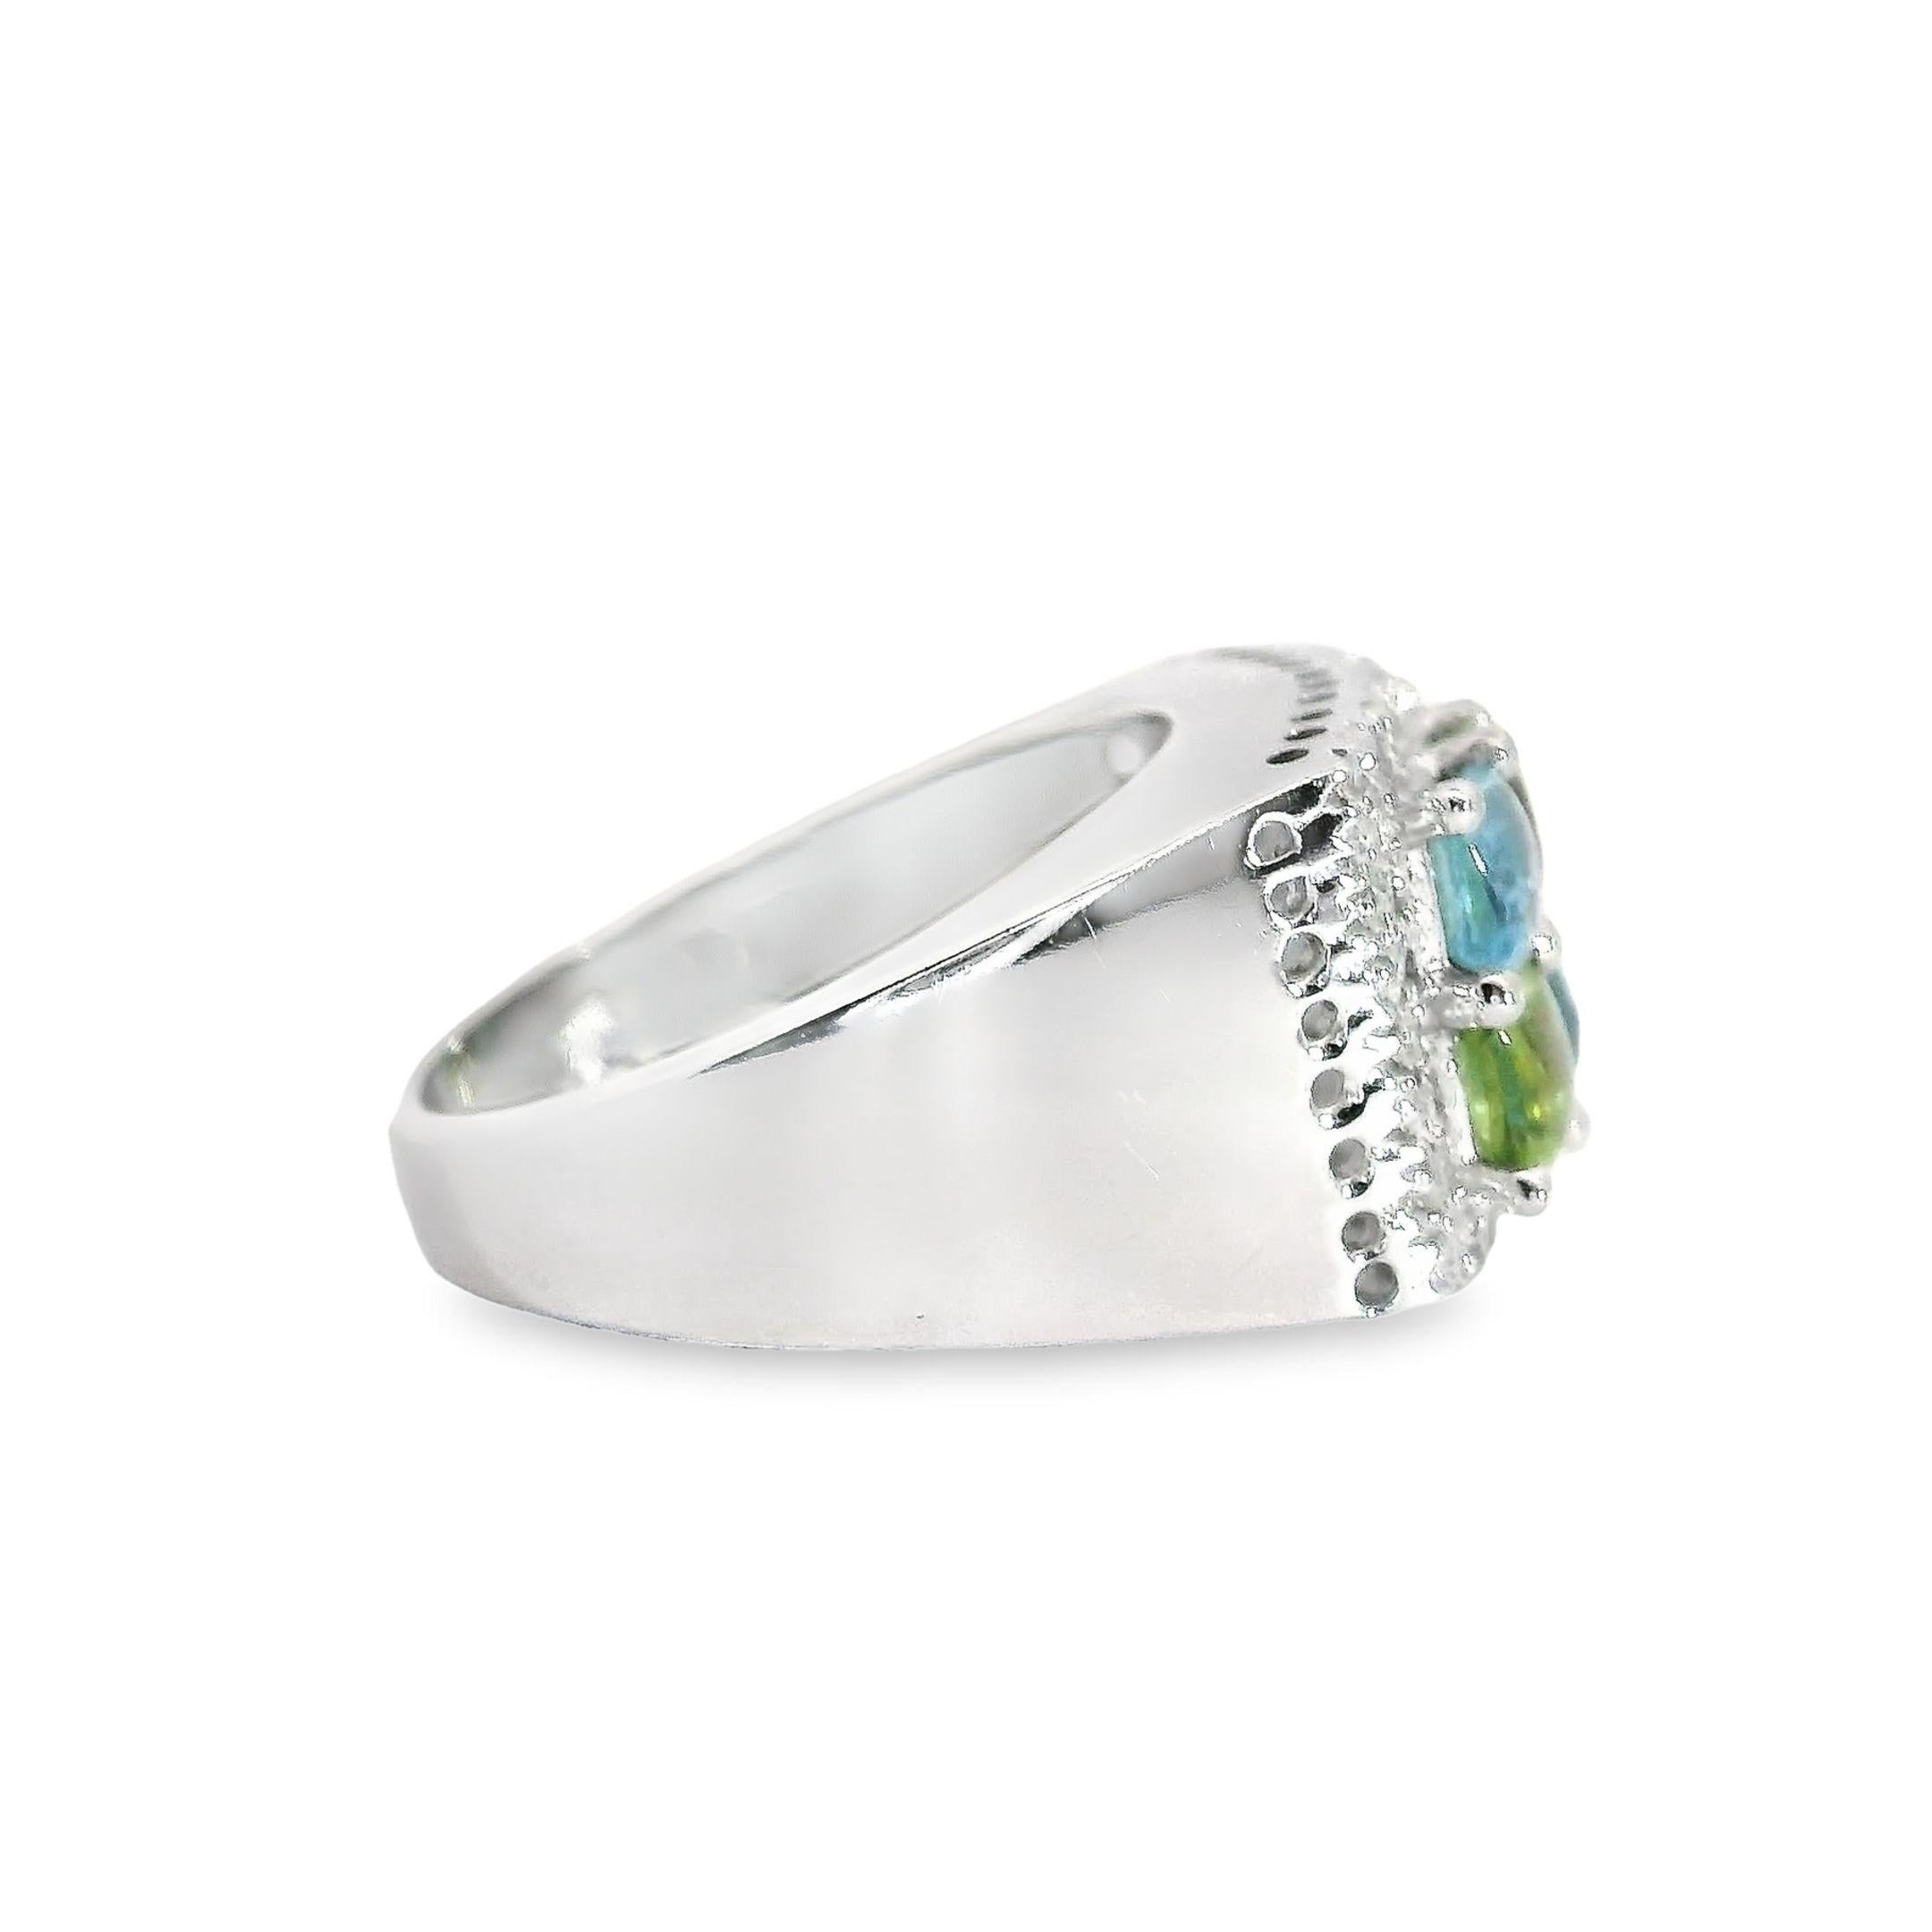 Mosaic Peridot and Blue Topaz Ring and Earrings in 18K White Gold with Diamonds 1